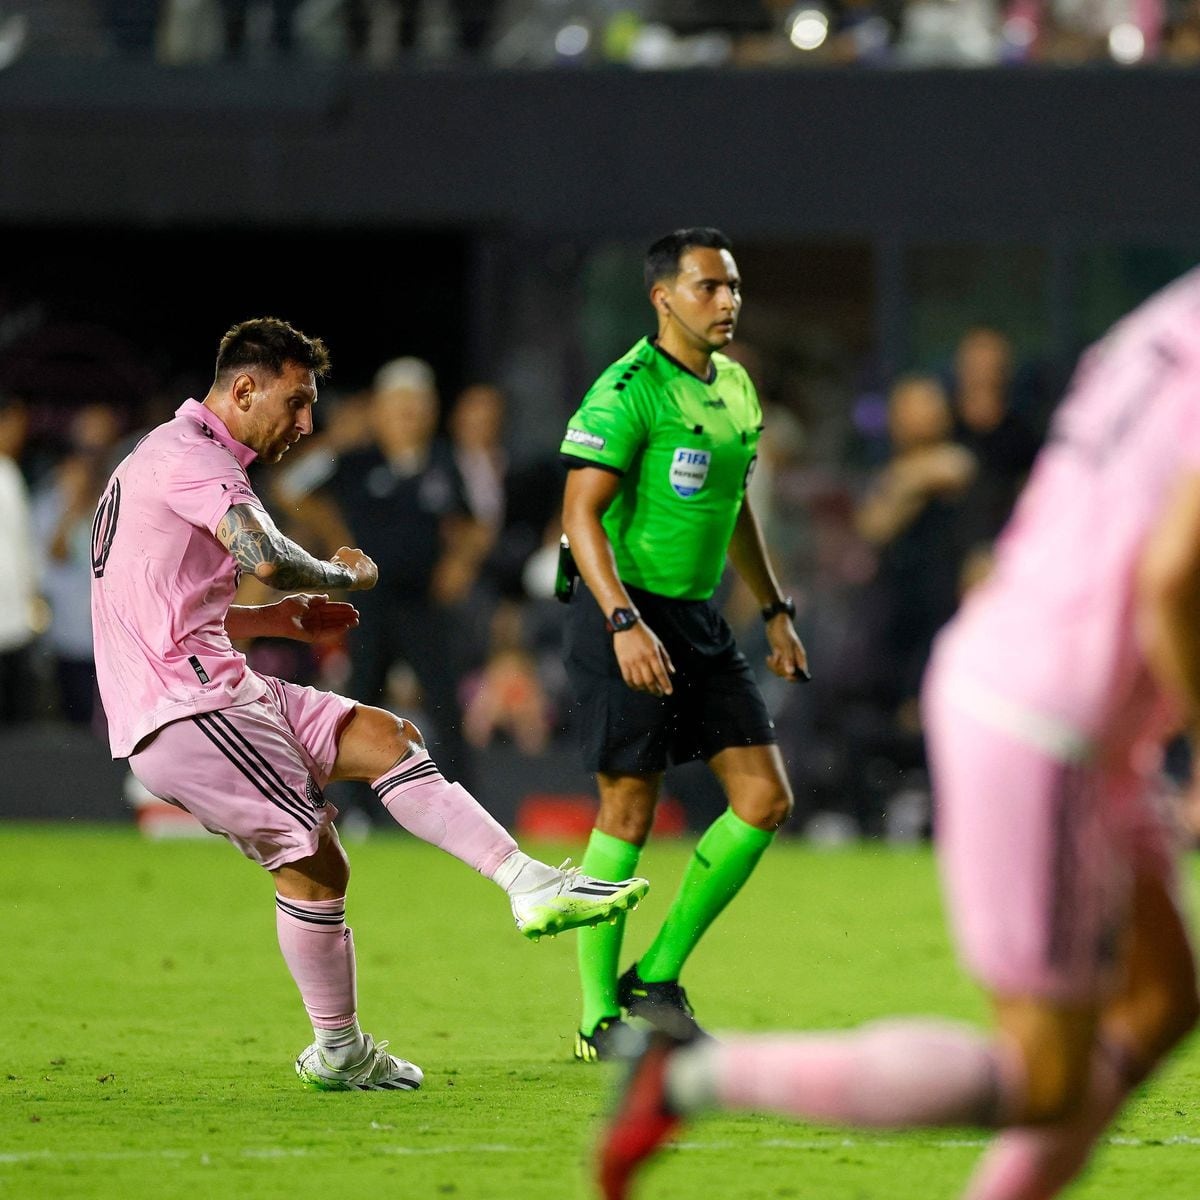 Top referee reveals interesting things about Messi